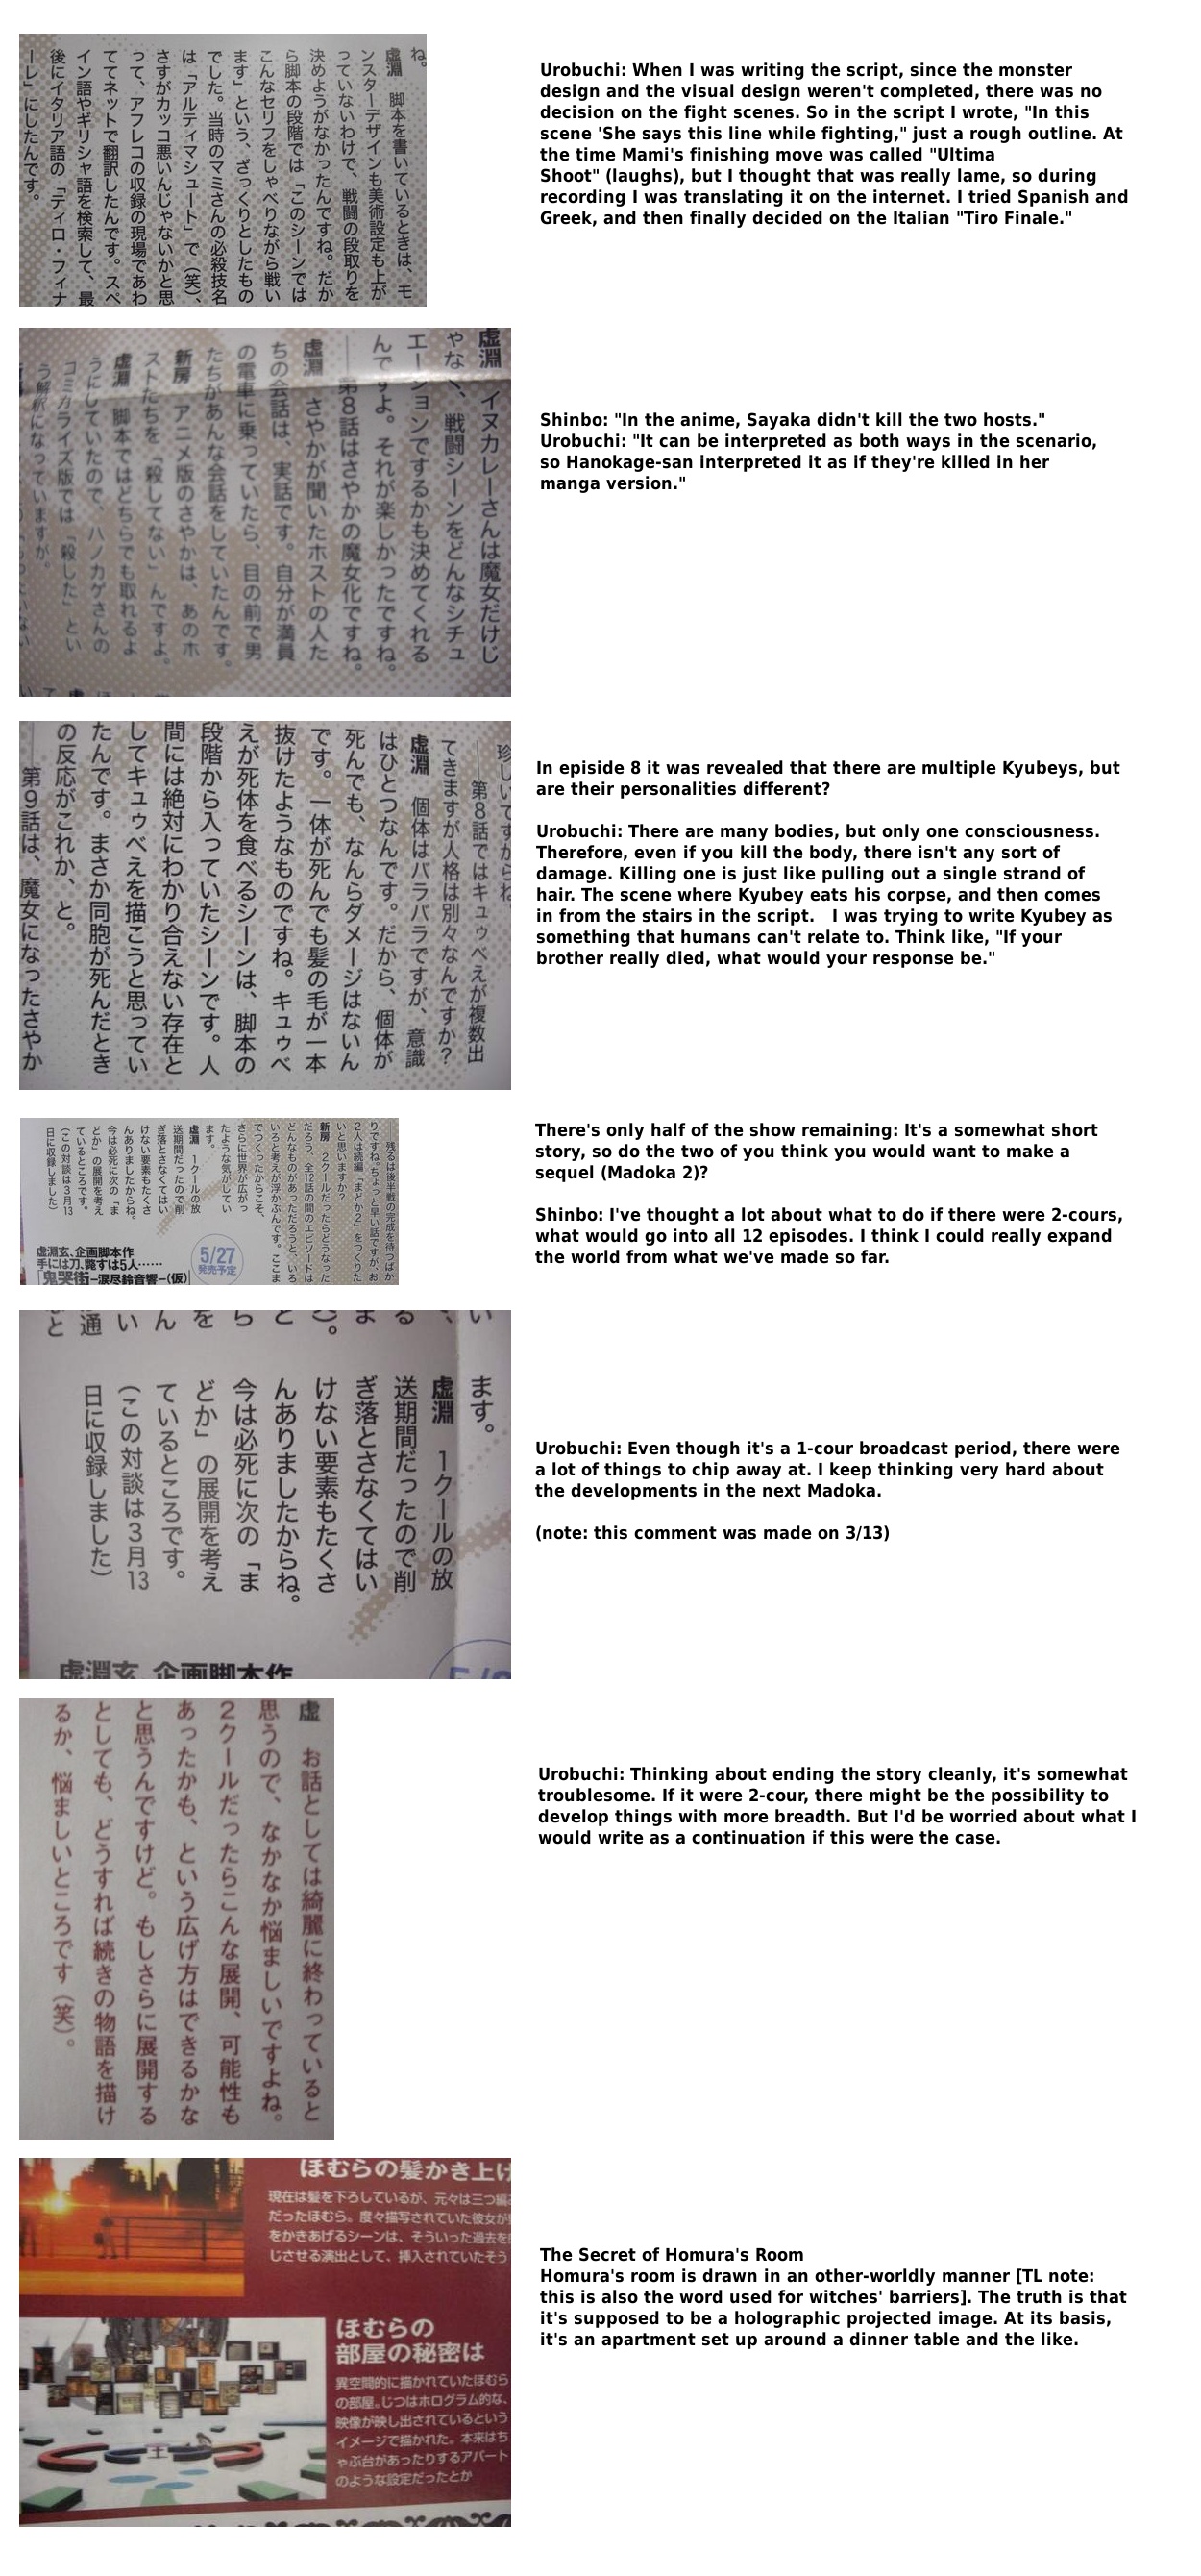 A compilation of the scans discussed below.